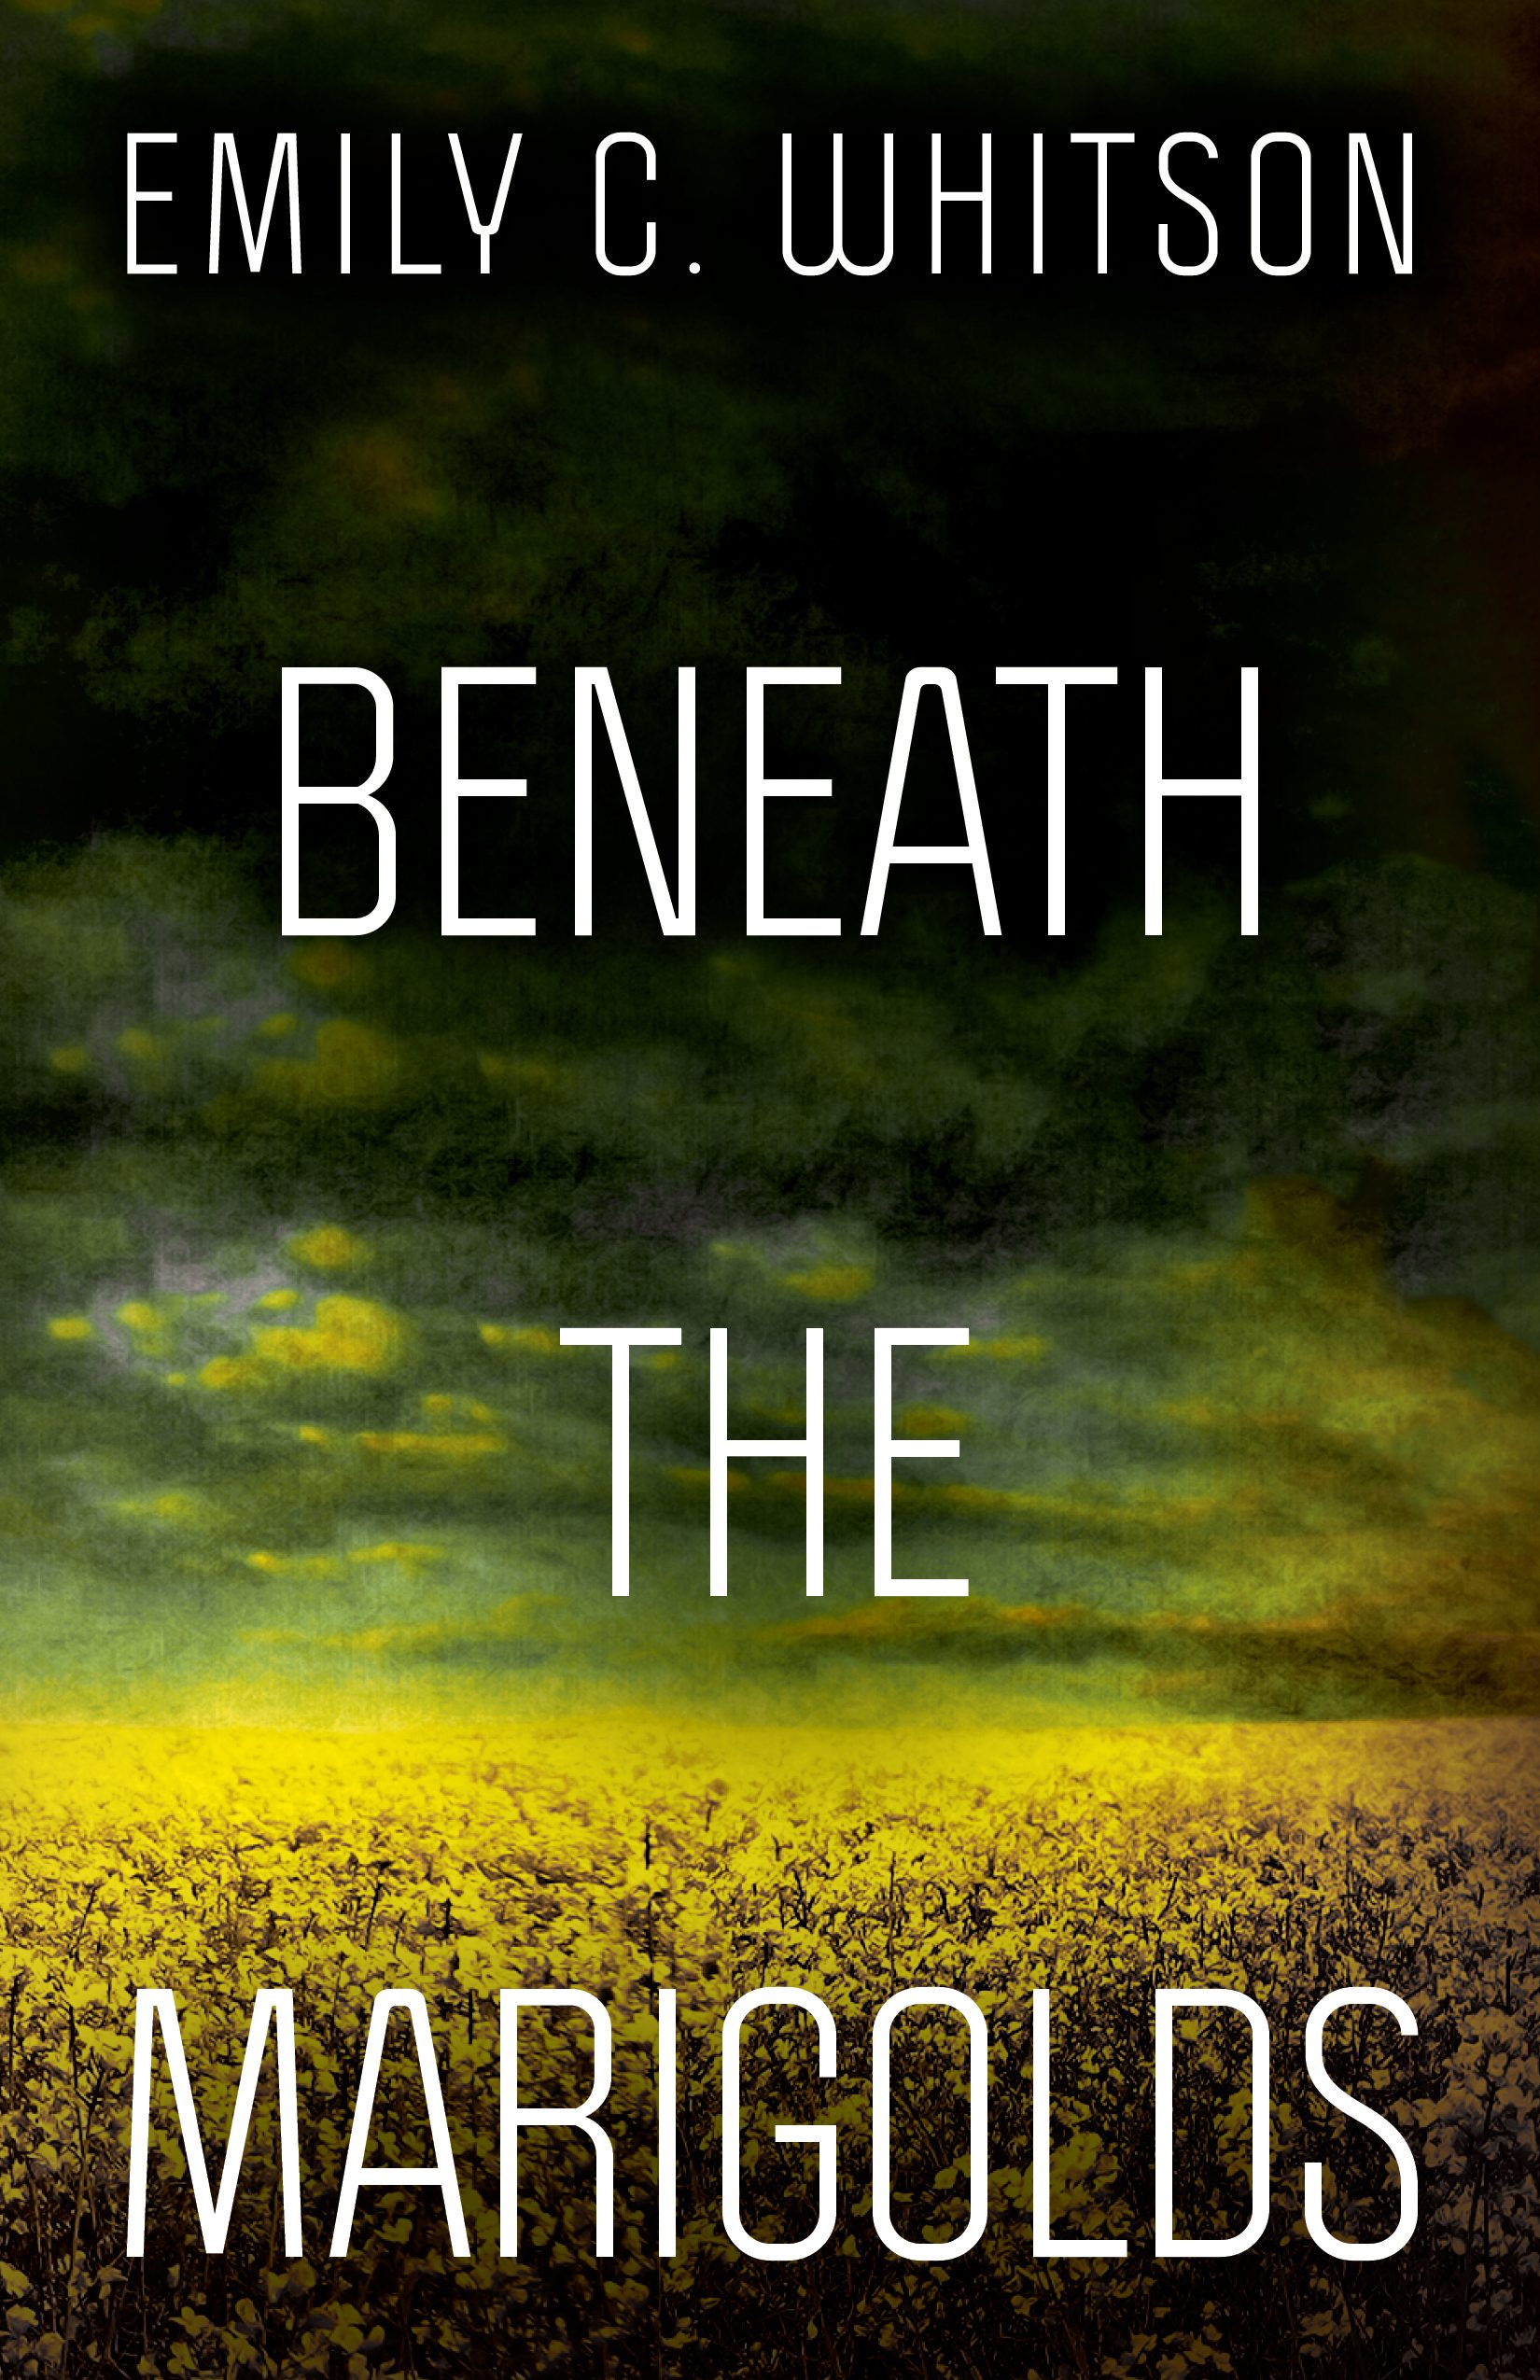 Beneath the Marigolds by Emily C. Whitson